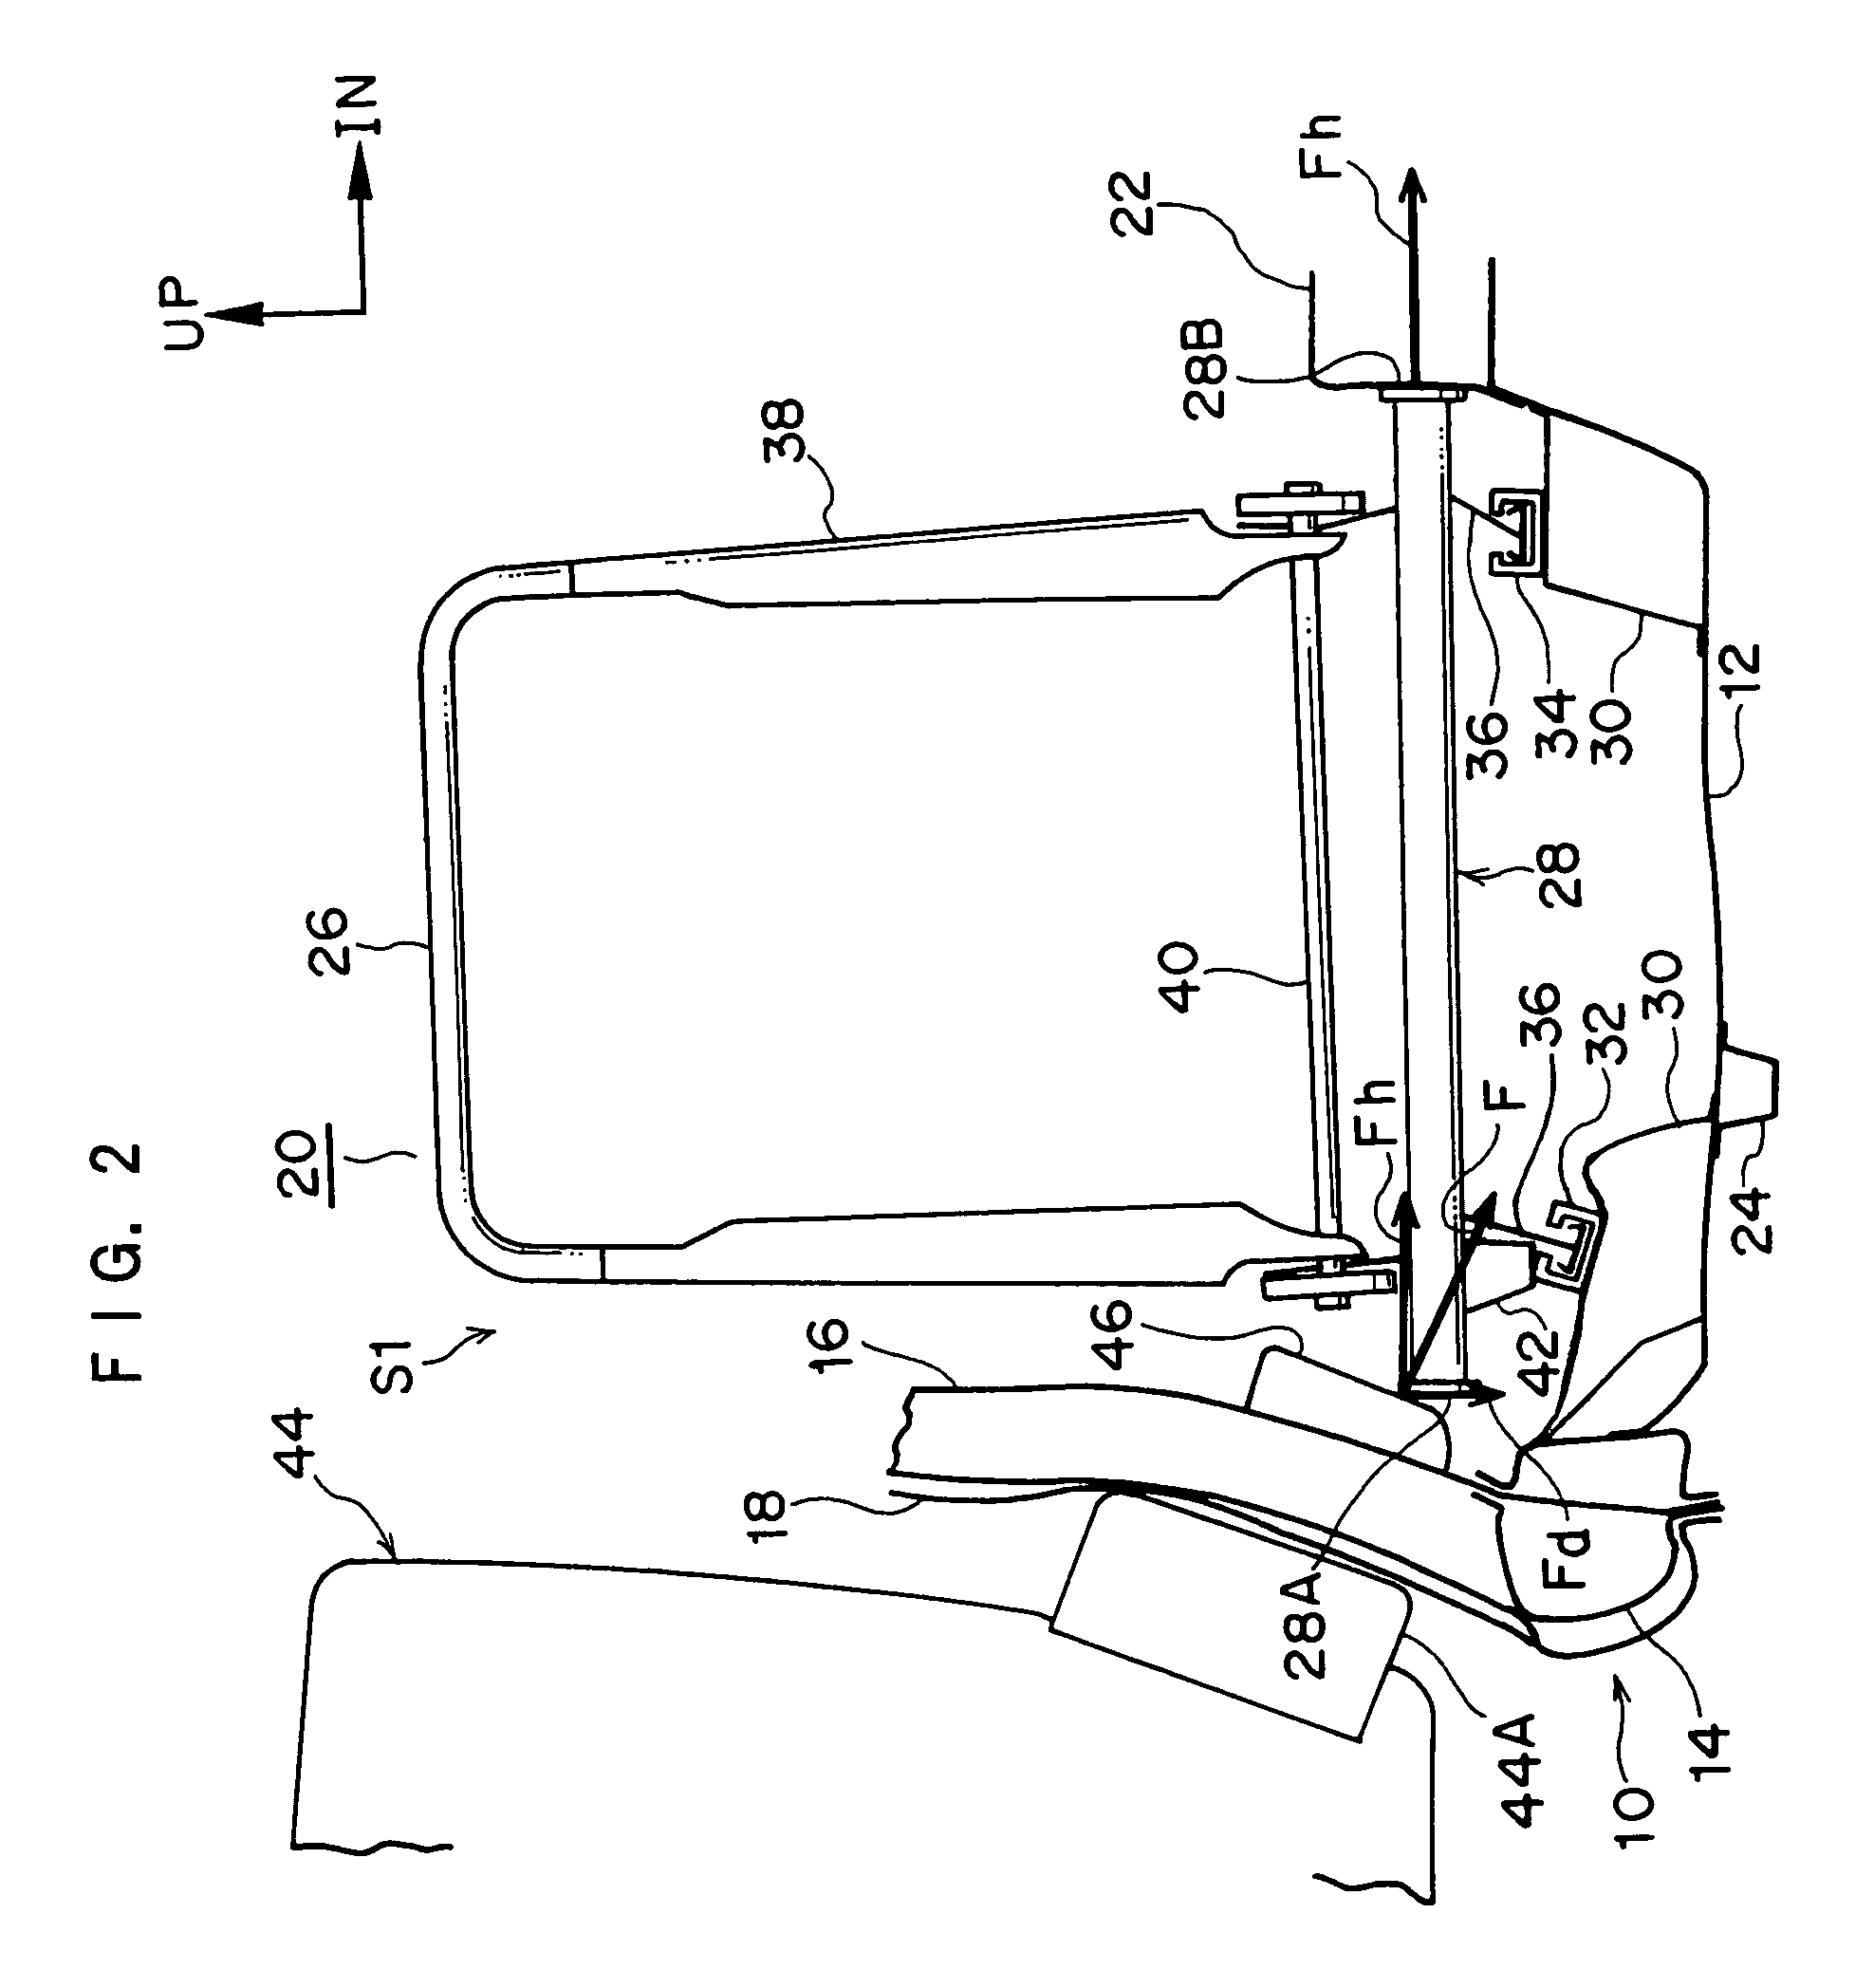 Side impact load transmitting structure